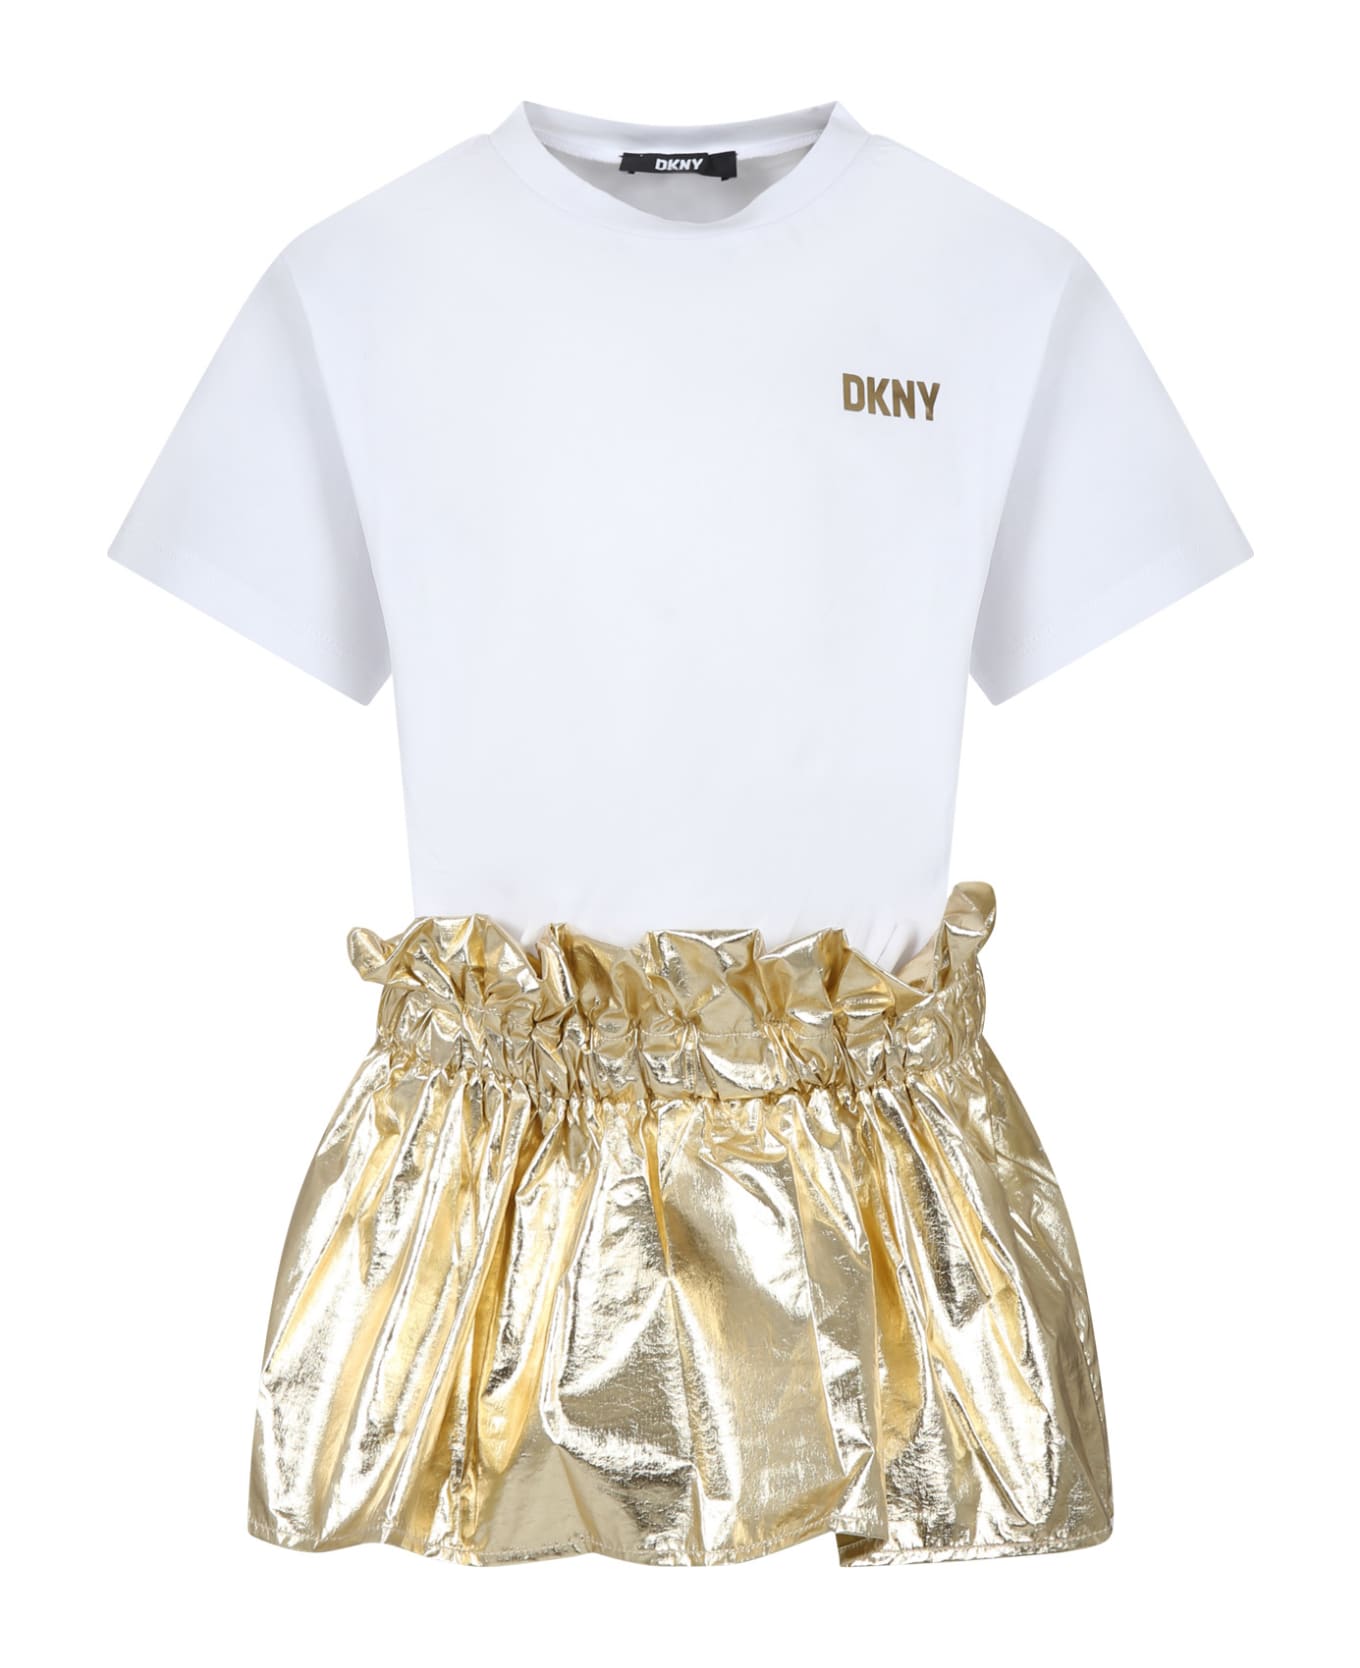 DKNY Casual White Dress For Girl With Logo - White